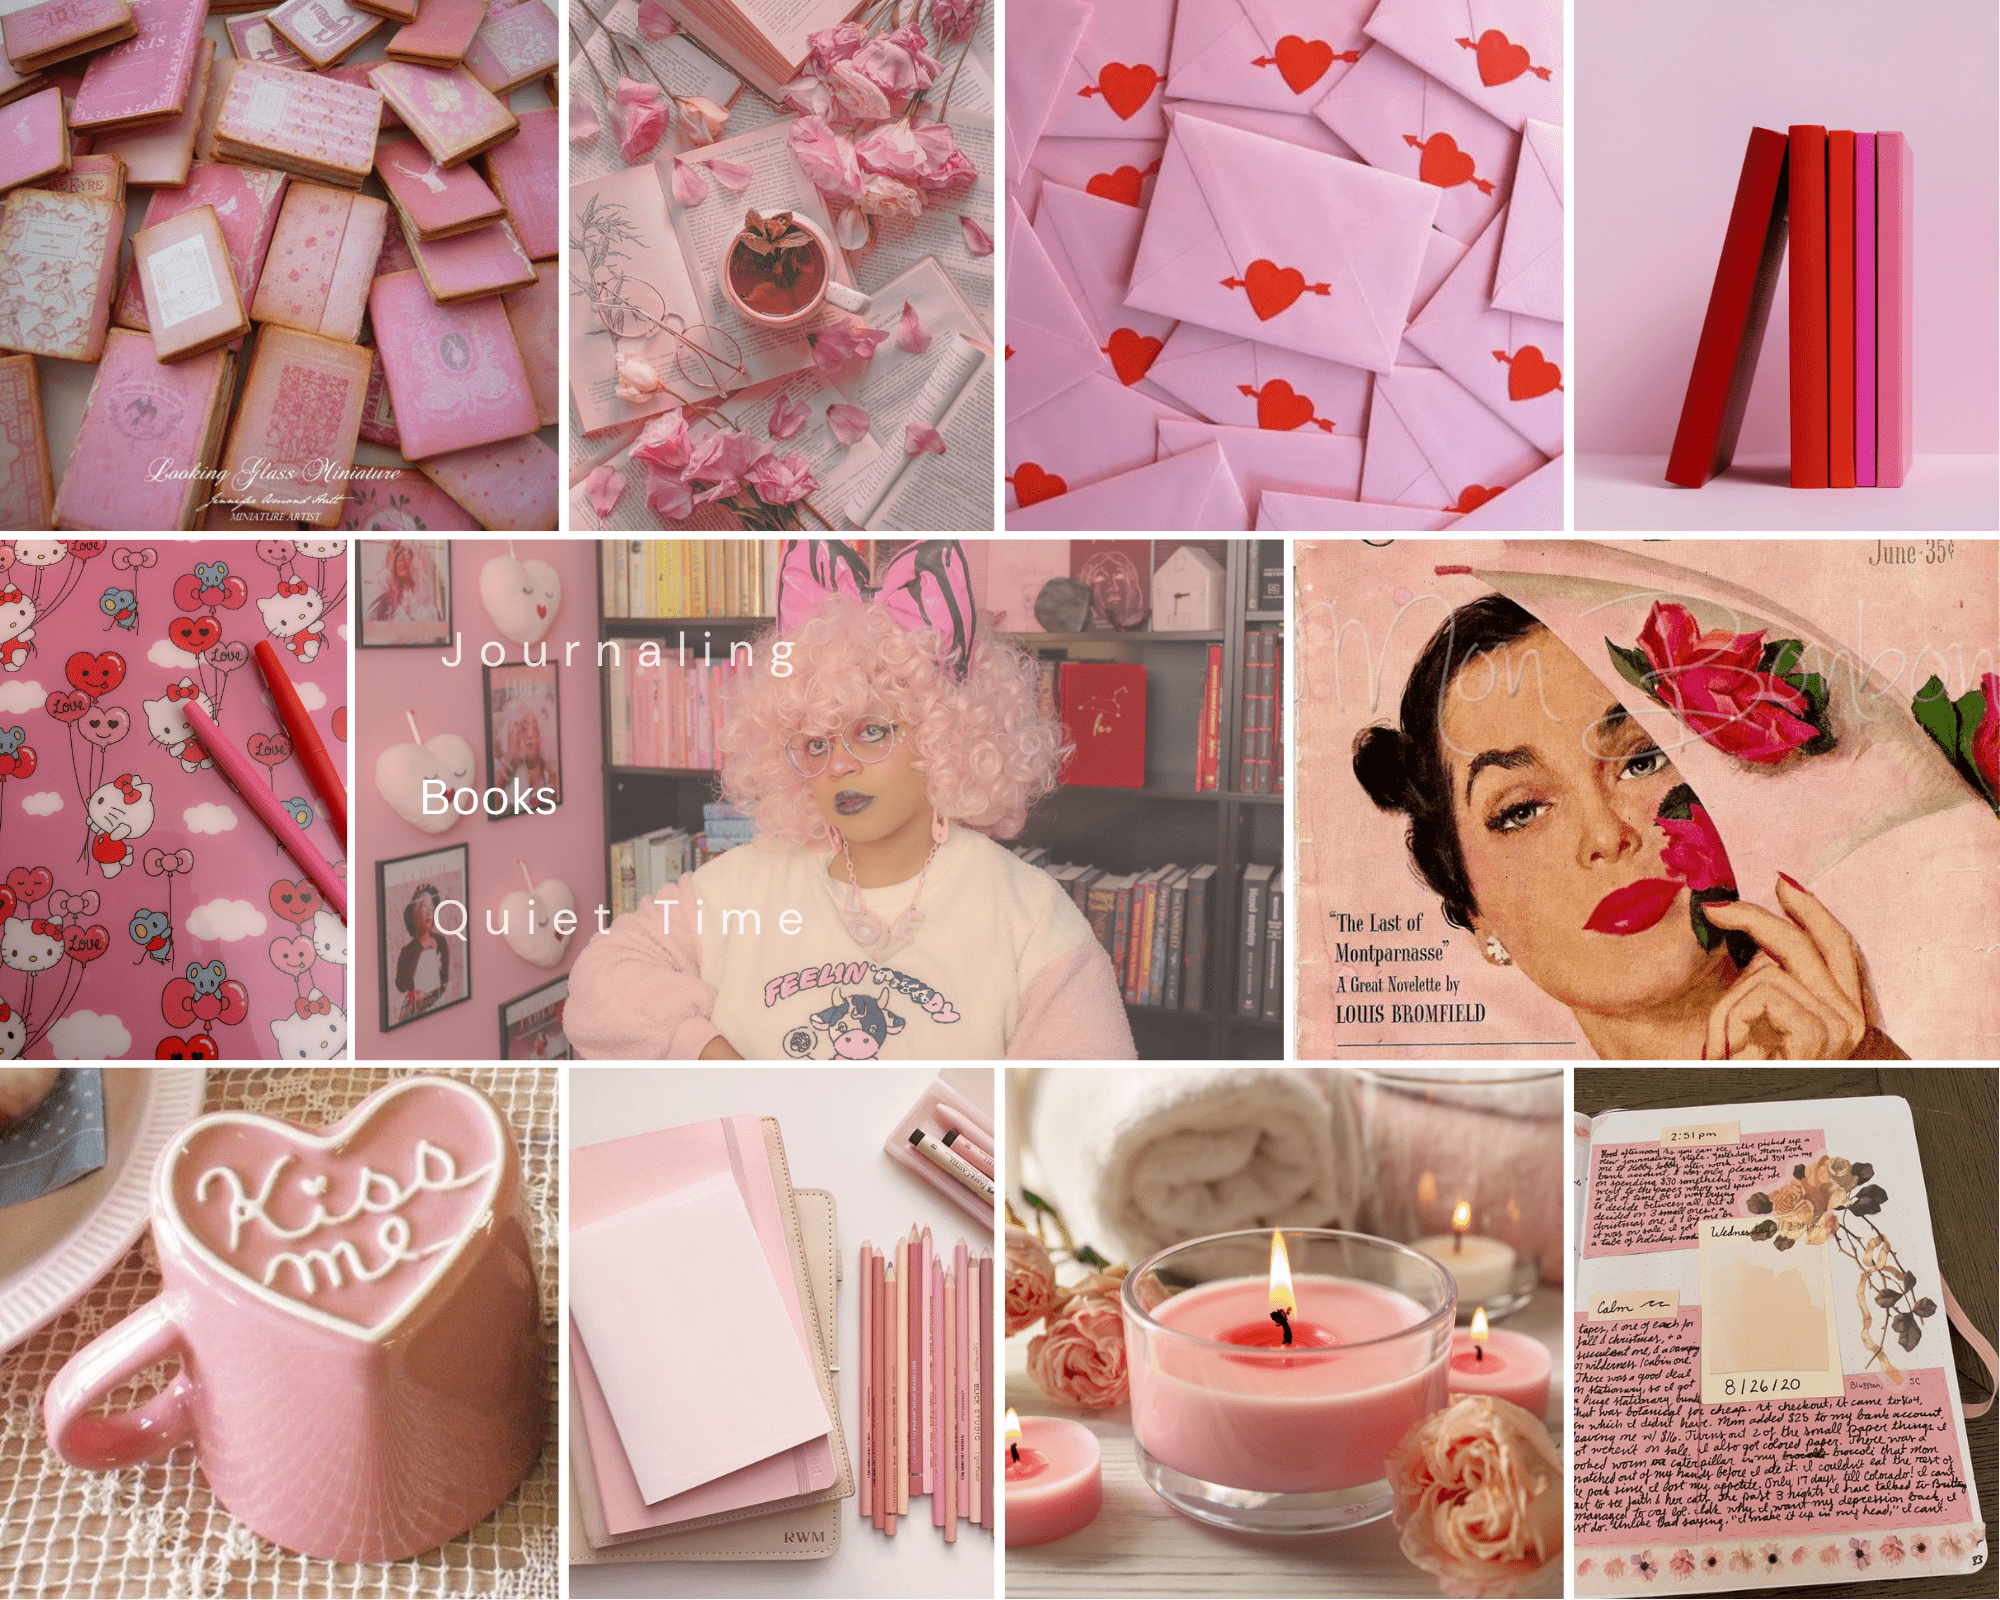 A collage of pink aesthetic pictures including books, candles, and journaling. - Lovecore